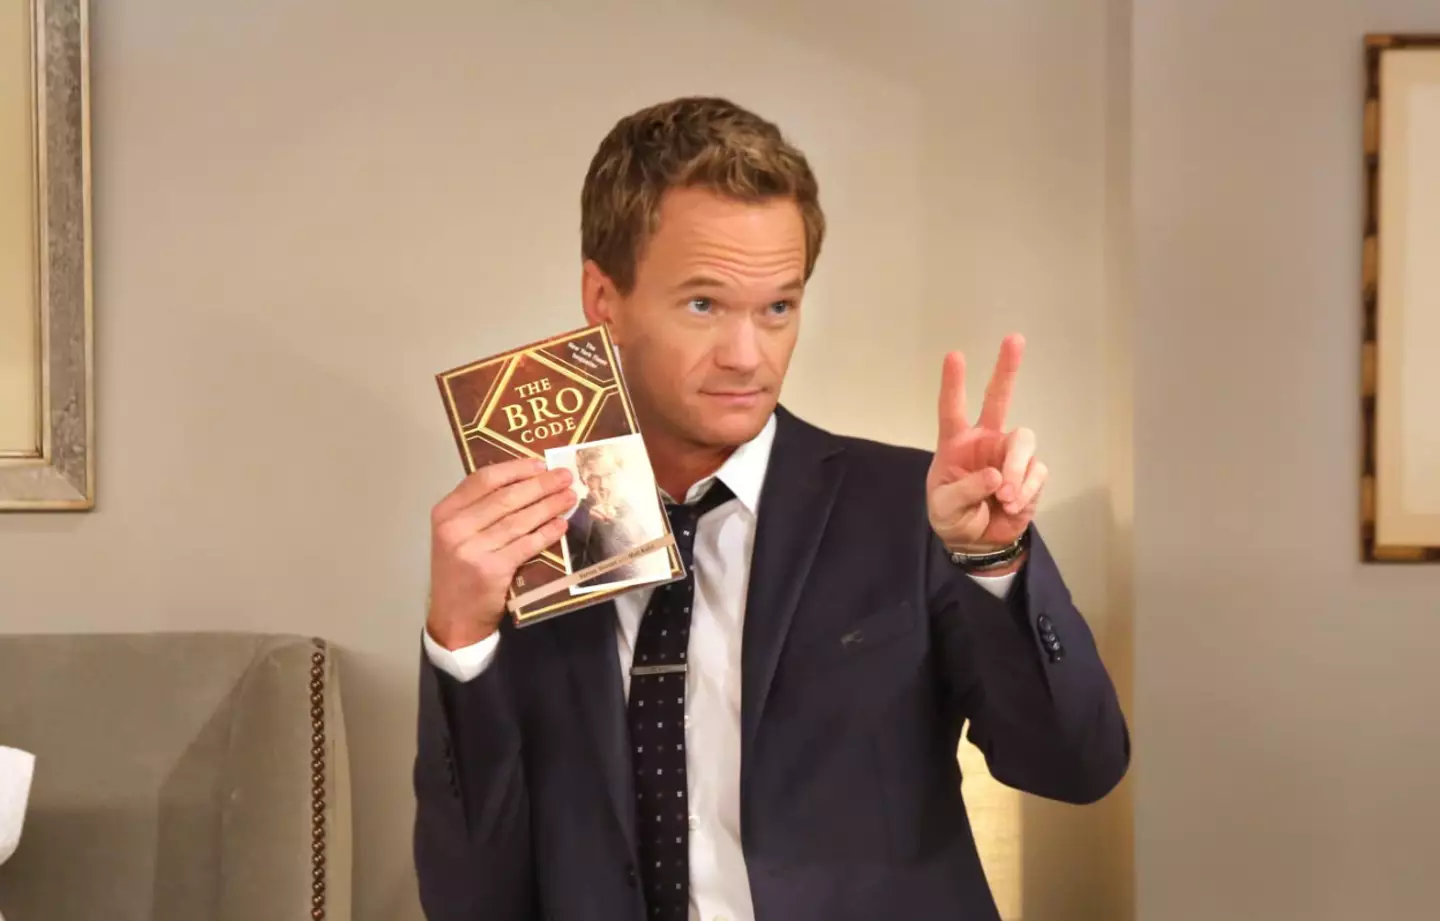 Neil Patrick Harris returns in his role as womanizer Barney Stinson.